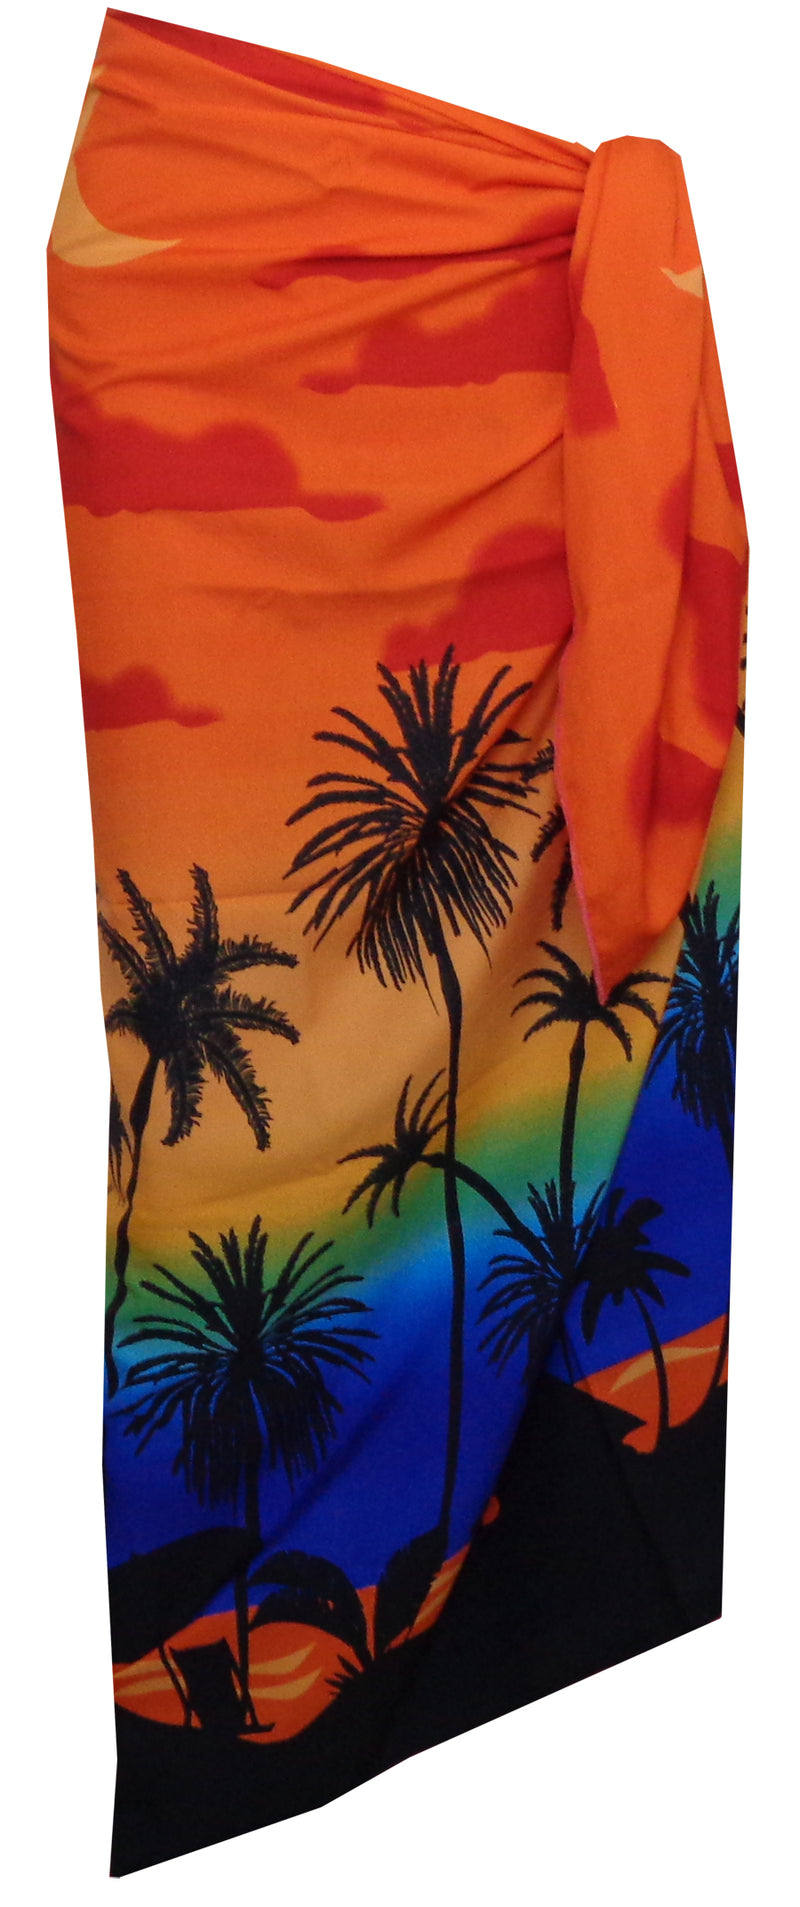 Sarong Women Scenic Coconut Printed Beach Swimsuit Wrap One Size Pareo